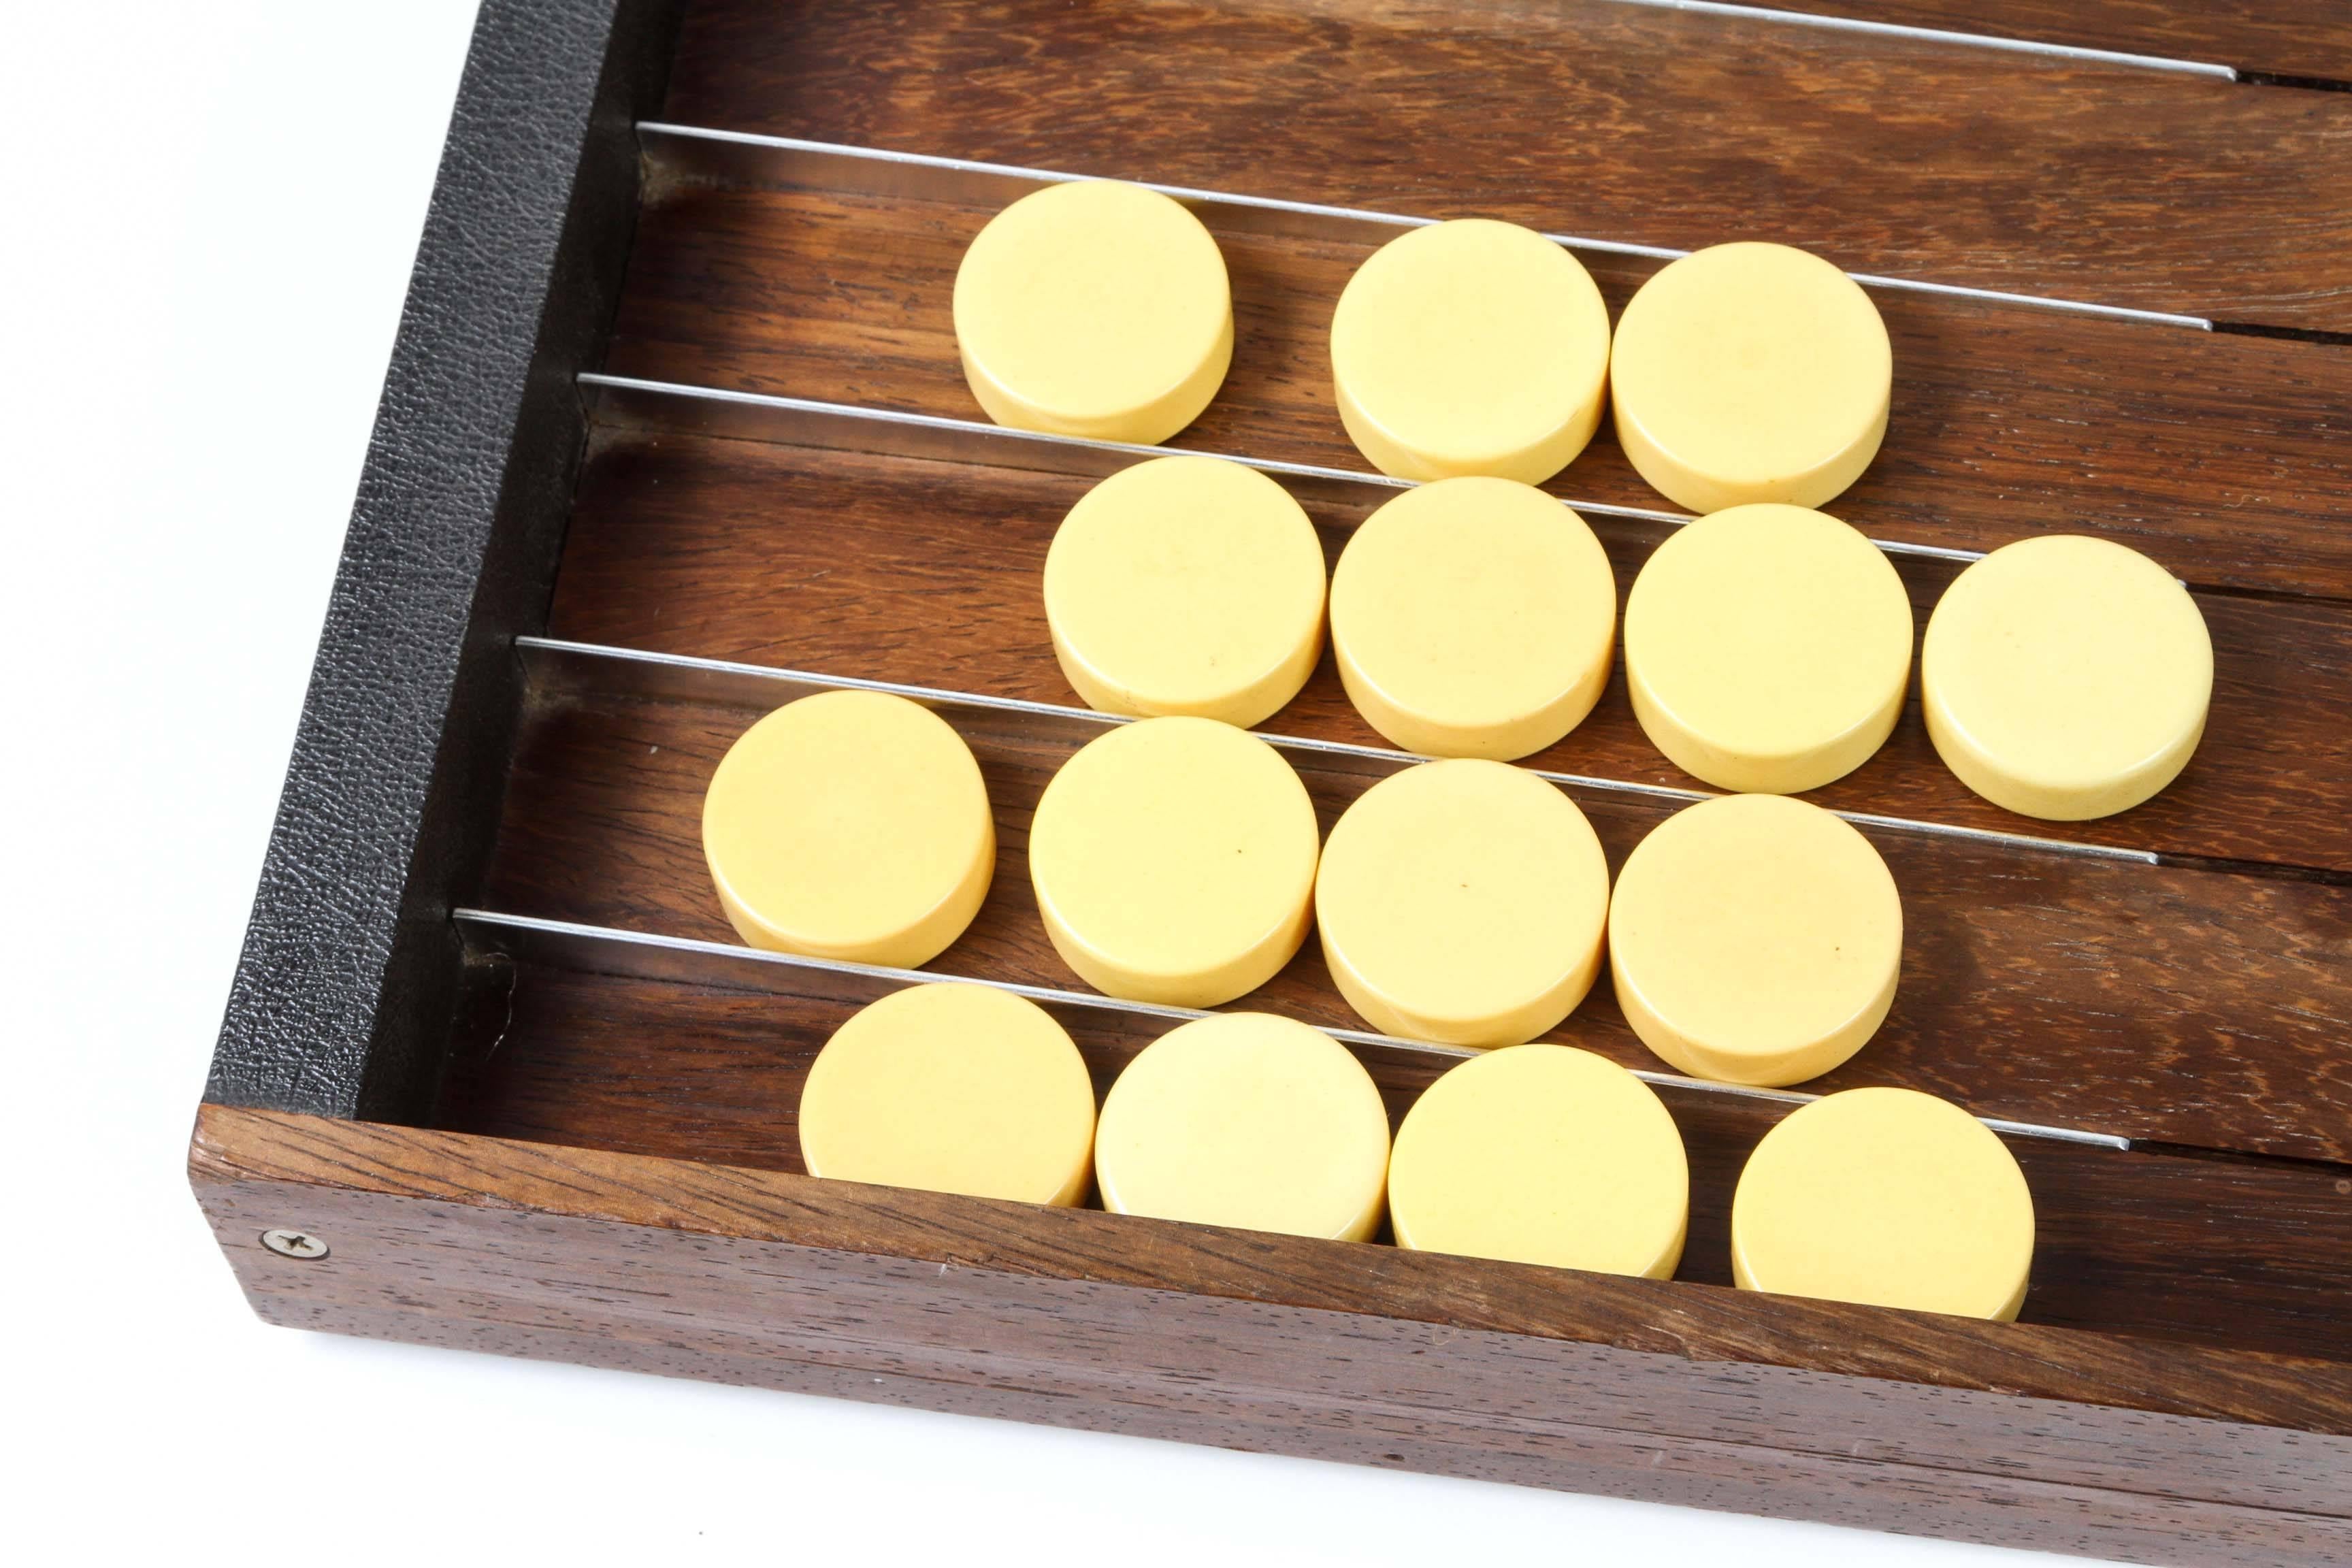 Unique handcrafted modern wooden backgammon set board.
Backgammon board in black embossed lizard faux and wood and metal.
15 red bakelite checkers, 15 ivory bakelite checkers and a set of two red and two white dice.
 